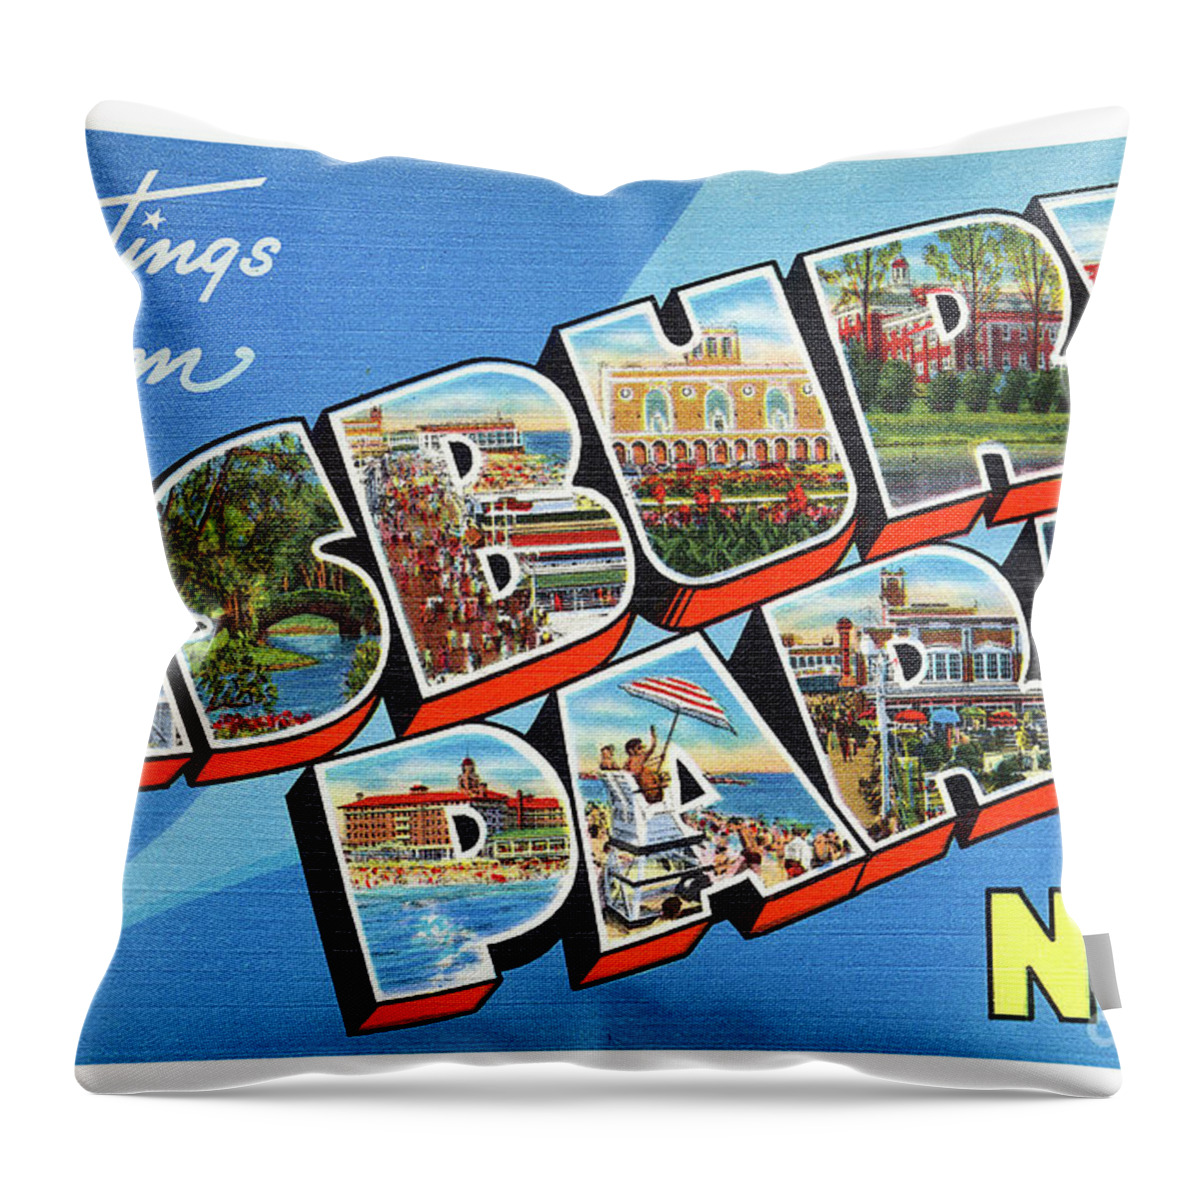 Lbi Throw Pillow featuring the photograph Asbury Park Greetings #2 by Mark Miller